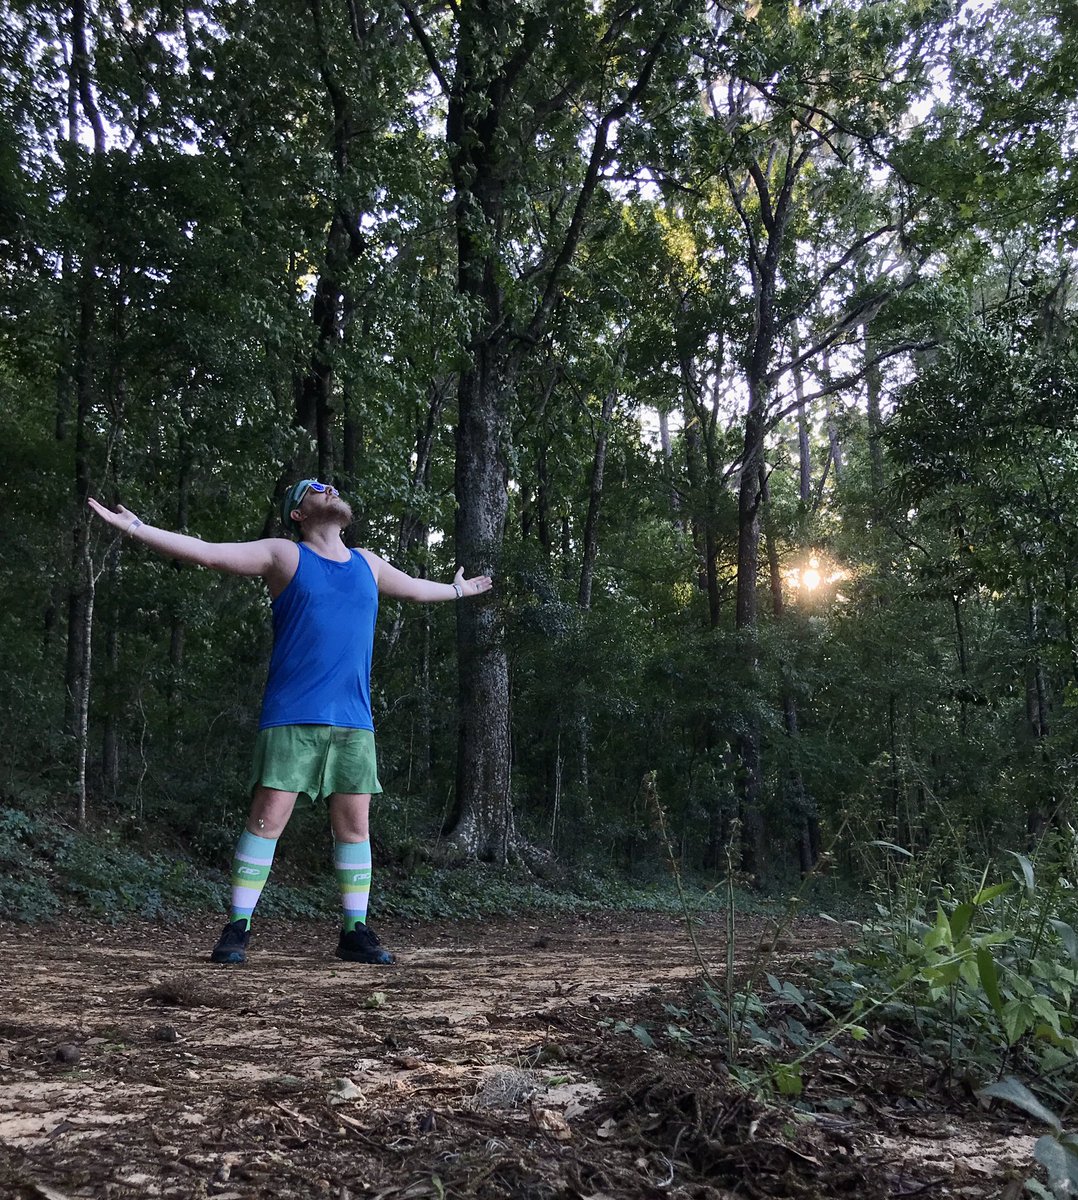 Mother Earth invited me out to play this evening. And the trail group…

4.22 miles.🌍

#IStandWithYou #teamnuun #HSHive #PROAlumni #SquirrelsNutButter #TeamROADiD #TeamULTRA #JoyWins #LeagueOfGarmin #shokzstar #shokzquad #RunChat #WeRunSocial #IHeartTally #Trailahassee